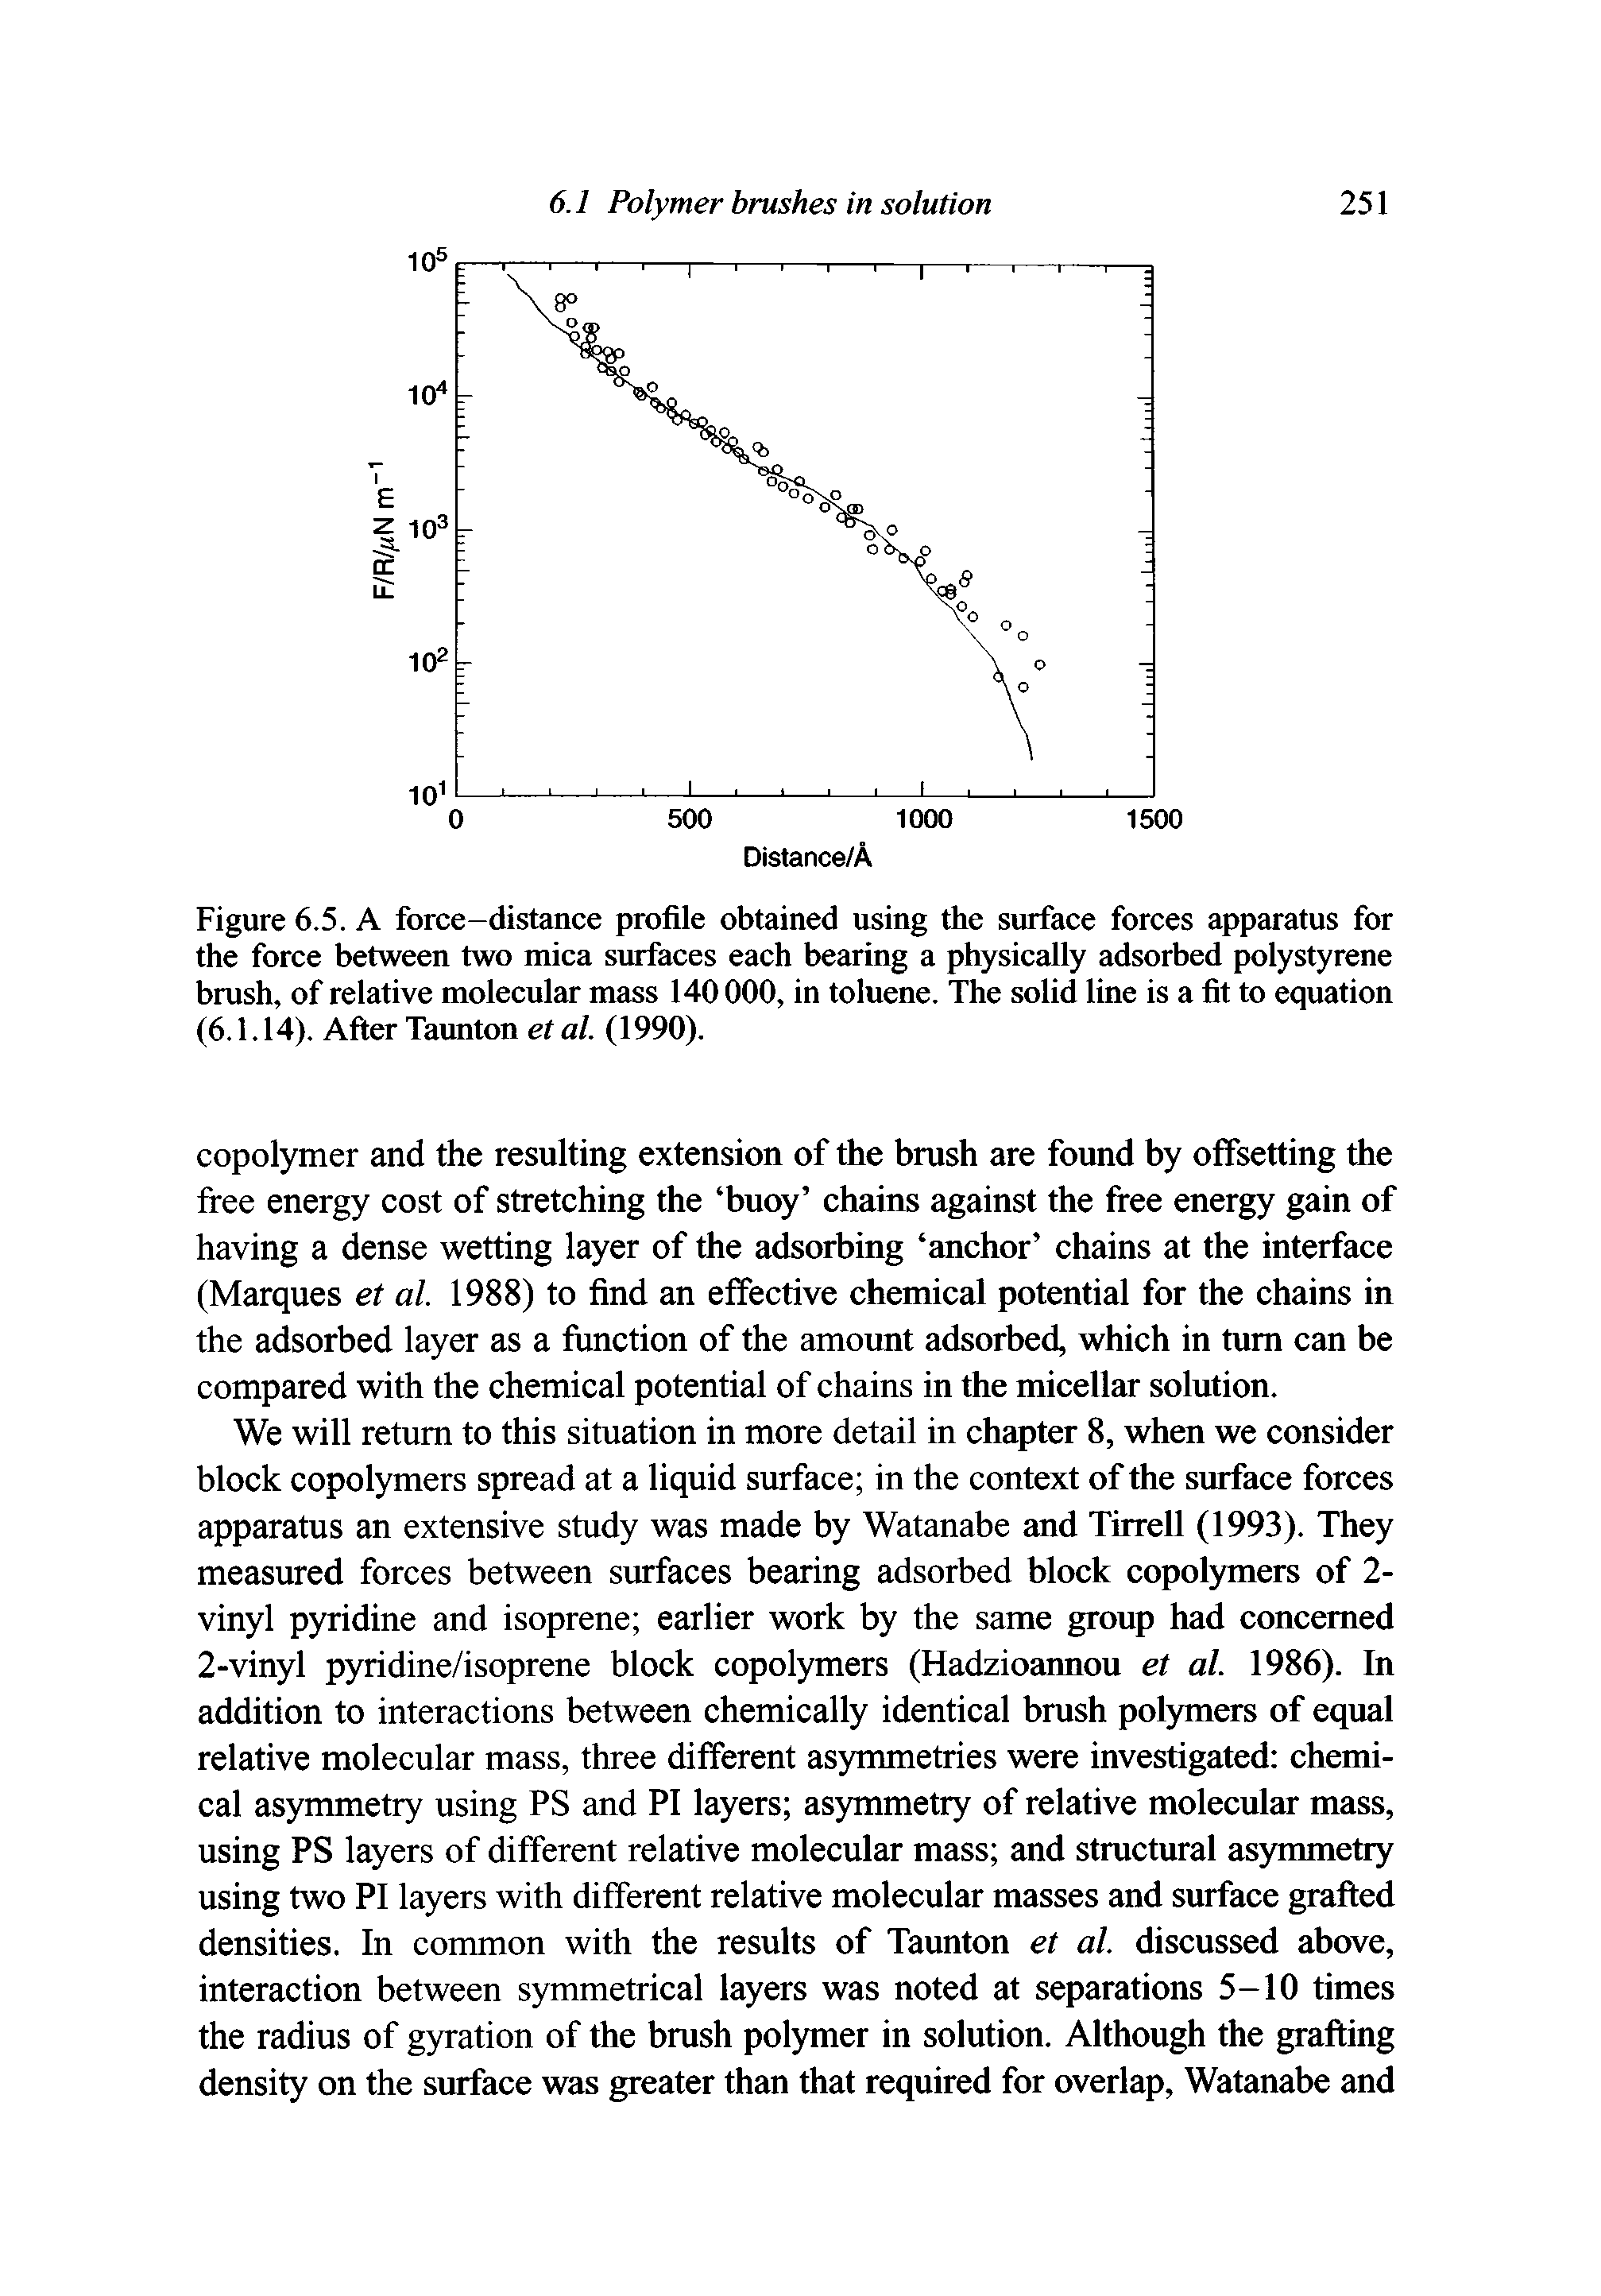 Figure 6.5. A force-distance profile obtained using the surface forces apparatus for the force between two mica surfaces each bearing a physically adsorbed polystyrene brush, of relative molecular mass 140000, in toluene. The solid line is a fit to equation (6.1.14). After Taunton et al. (1990).